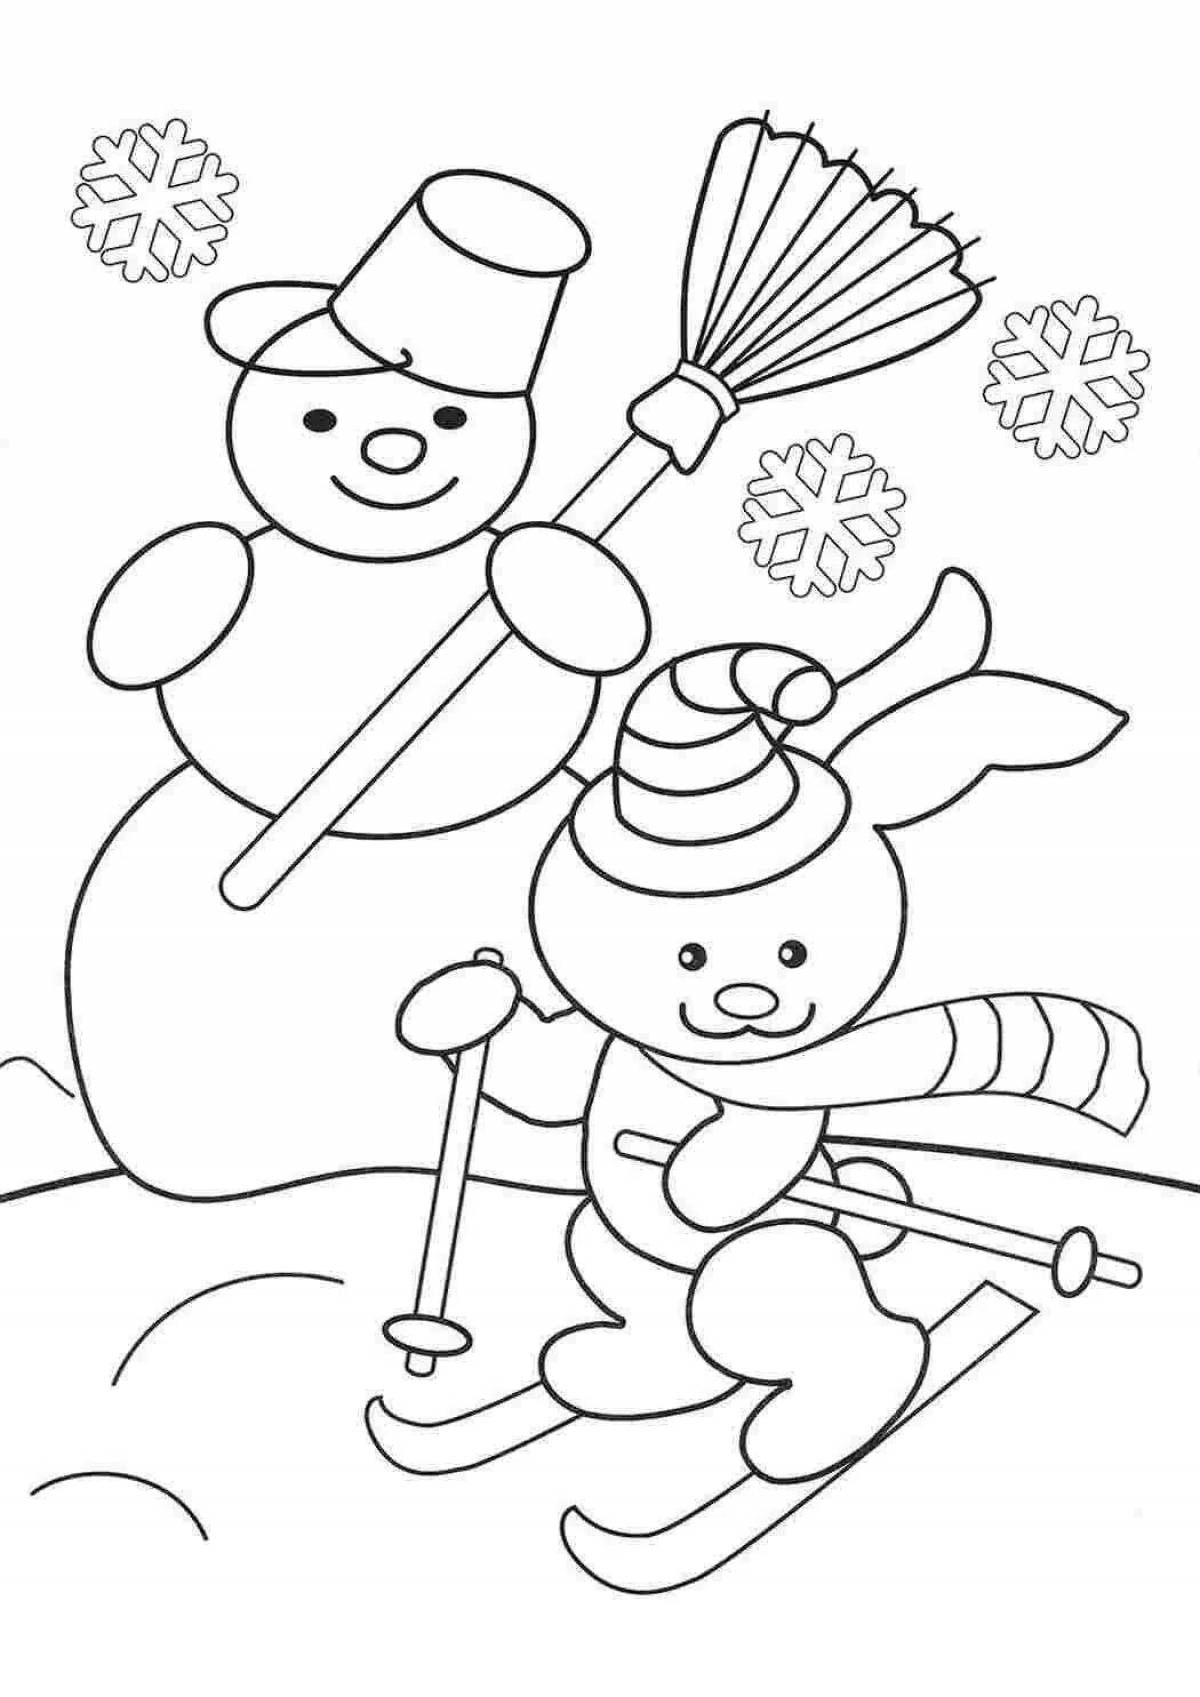 Winter for children 4 years old #5